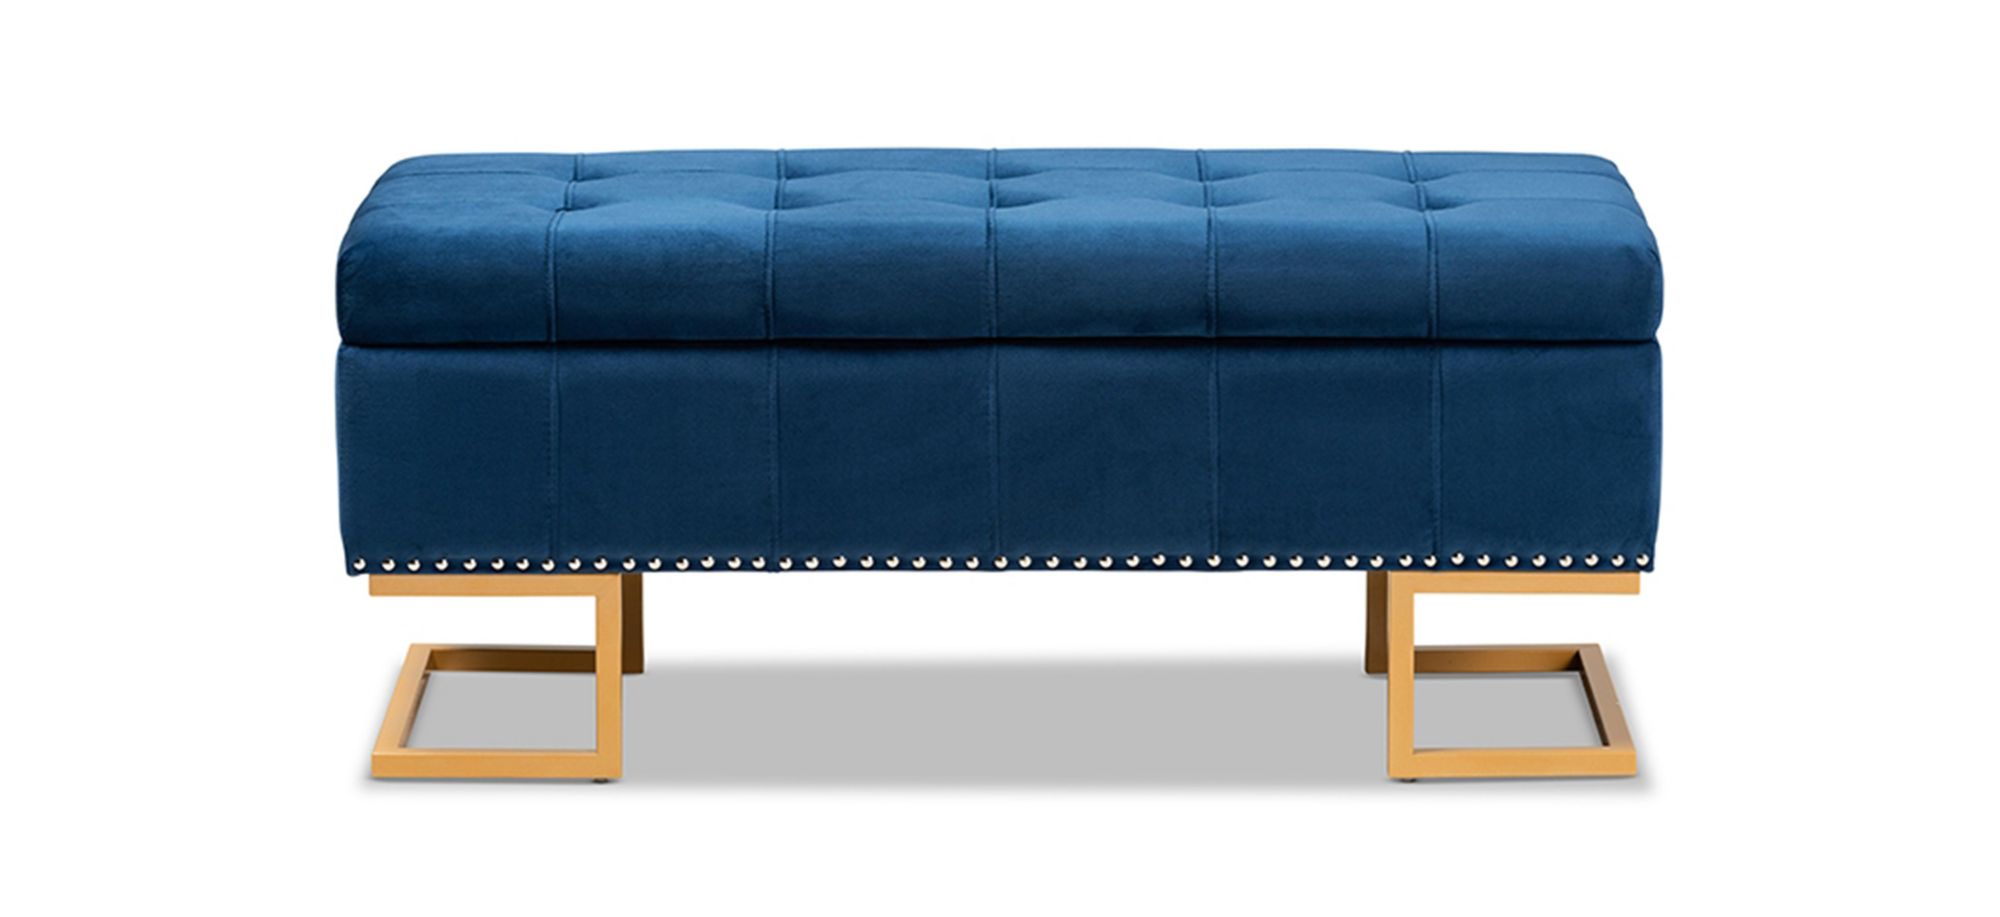 Ellery Storage Ottoman in Navy Blue/Gold by Wholesale Interiors